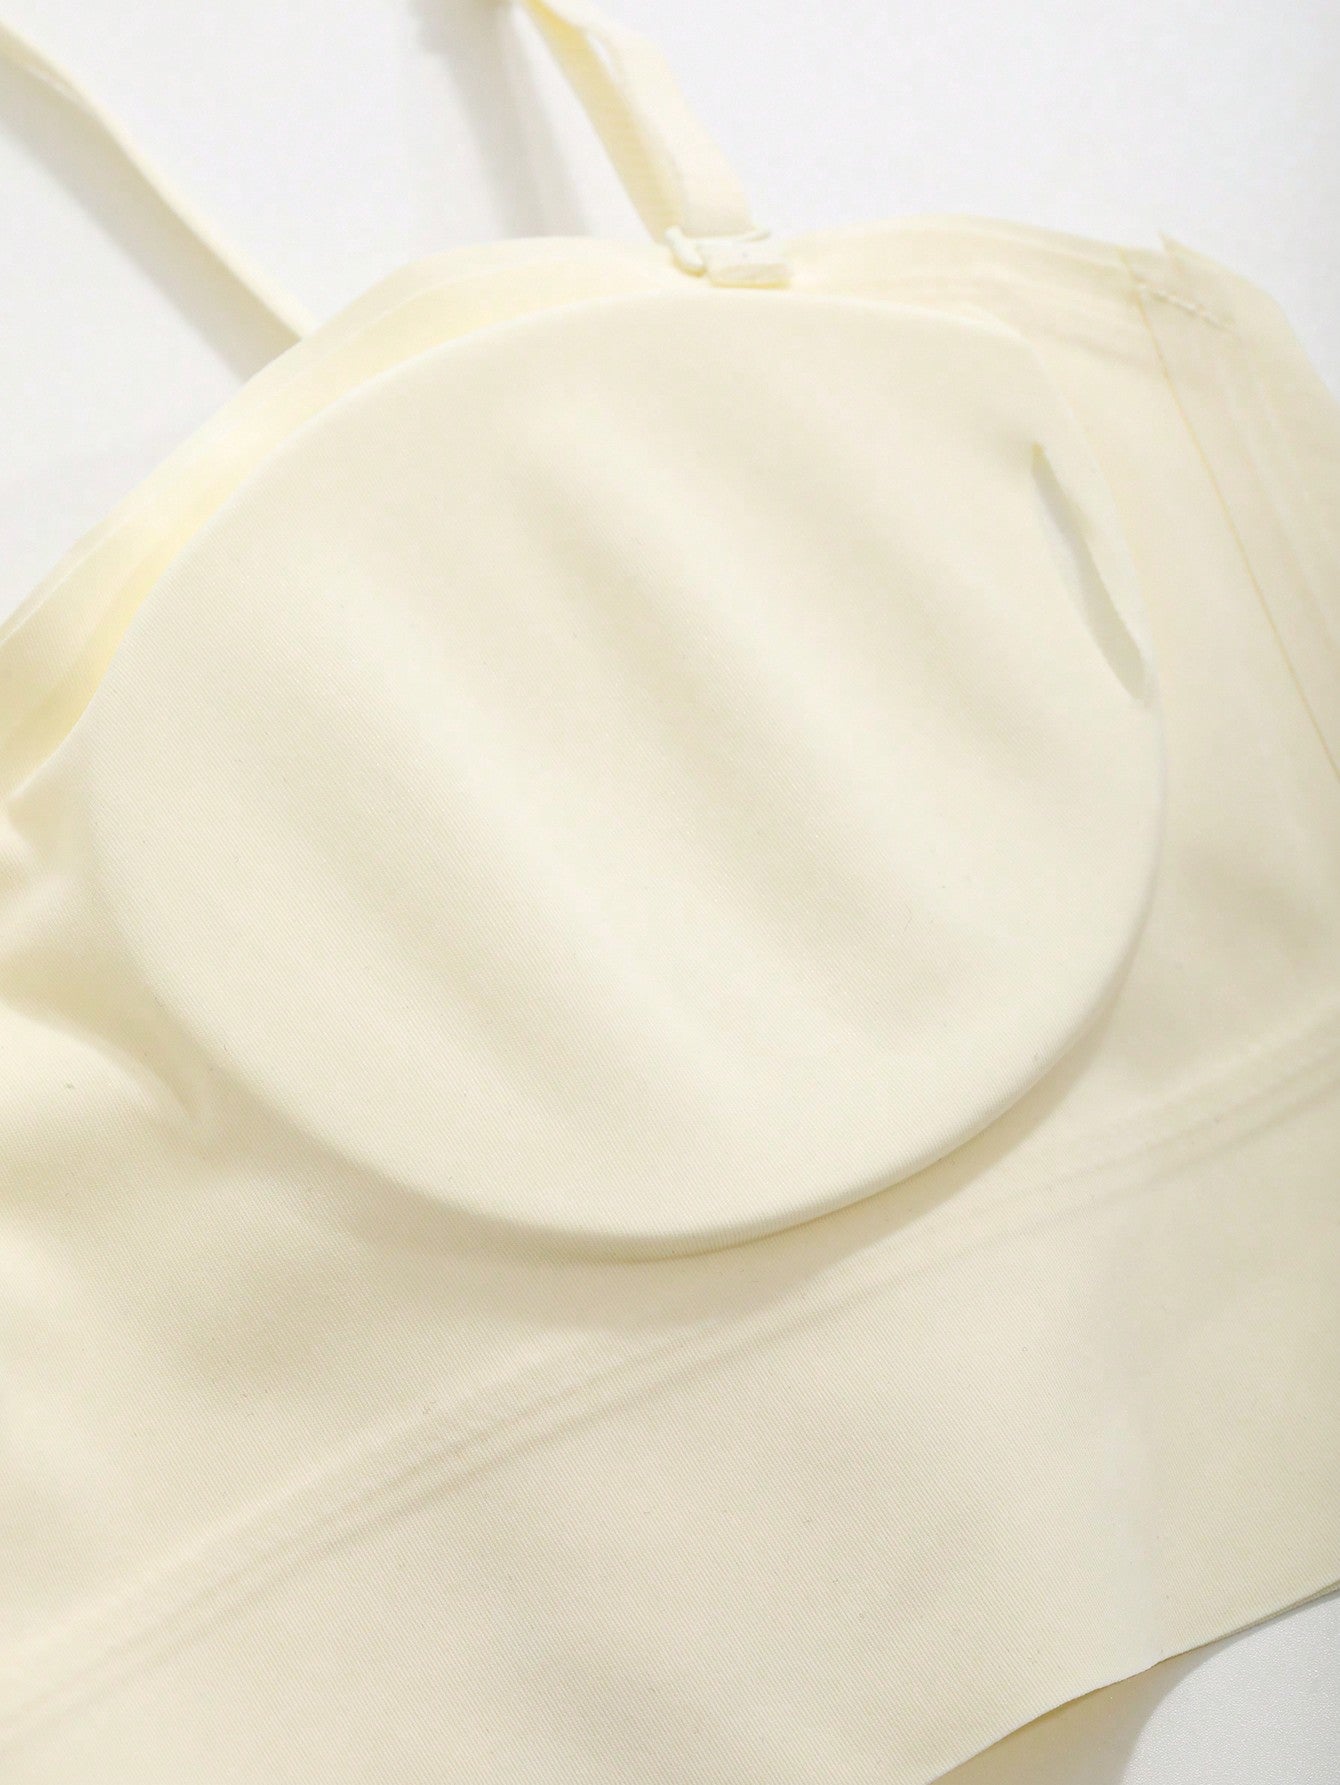 Thin Strapless Bra, Non-Slip Design, Push Up Cup, U-Shaped Back, Suitable For Small Chests